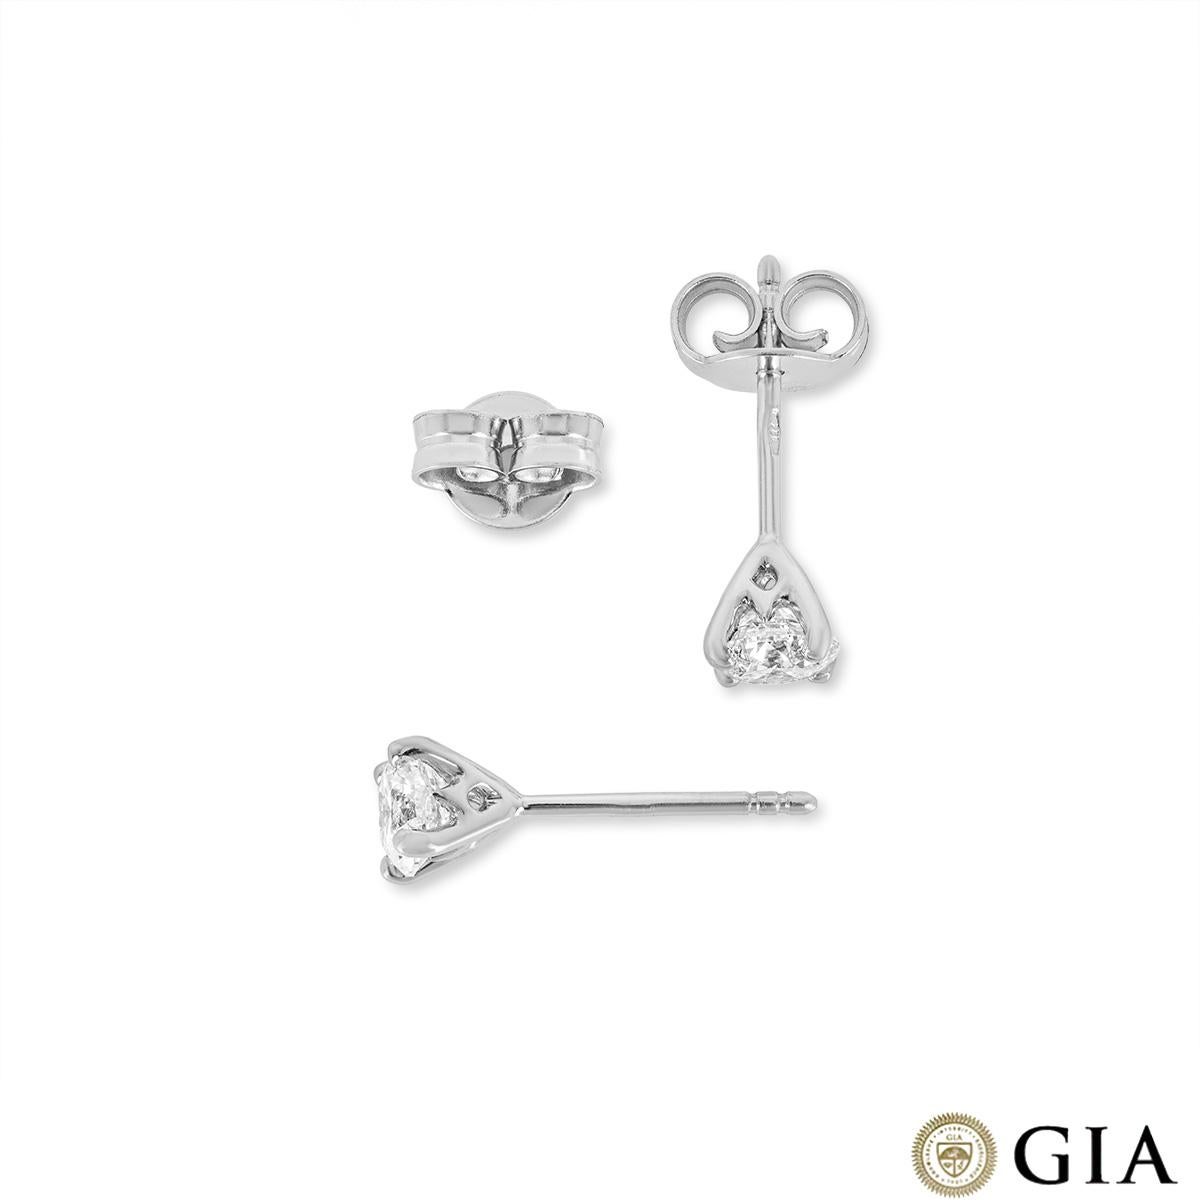 GIA Certified White Gold Round Brilliant Cut Diamond Earrings 0.80 Carat TDW In New Condition For Sale In London, GB